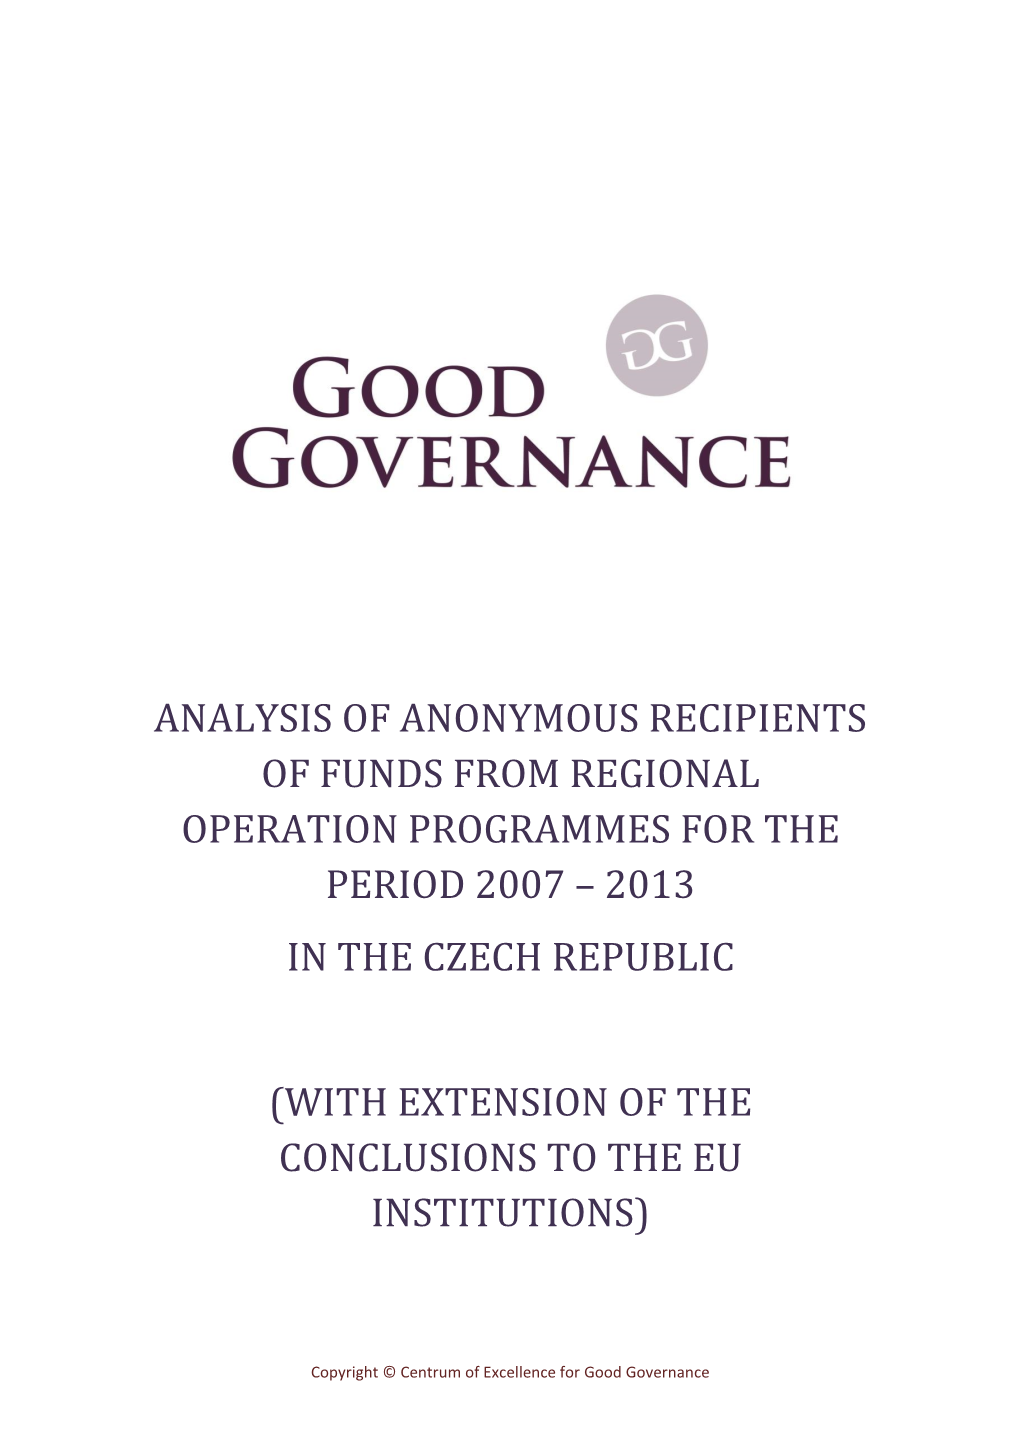 Analysis of Anonymous Recipients of Funds from Regional Operation Programmes for the Period 2007